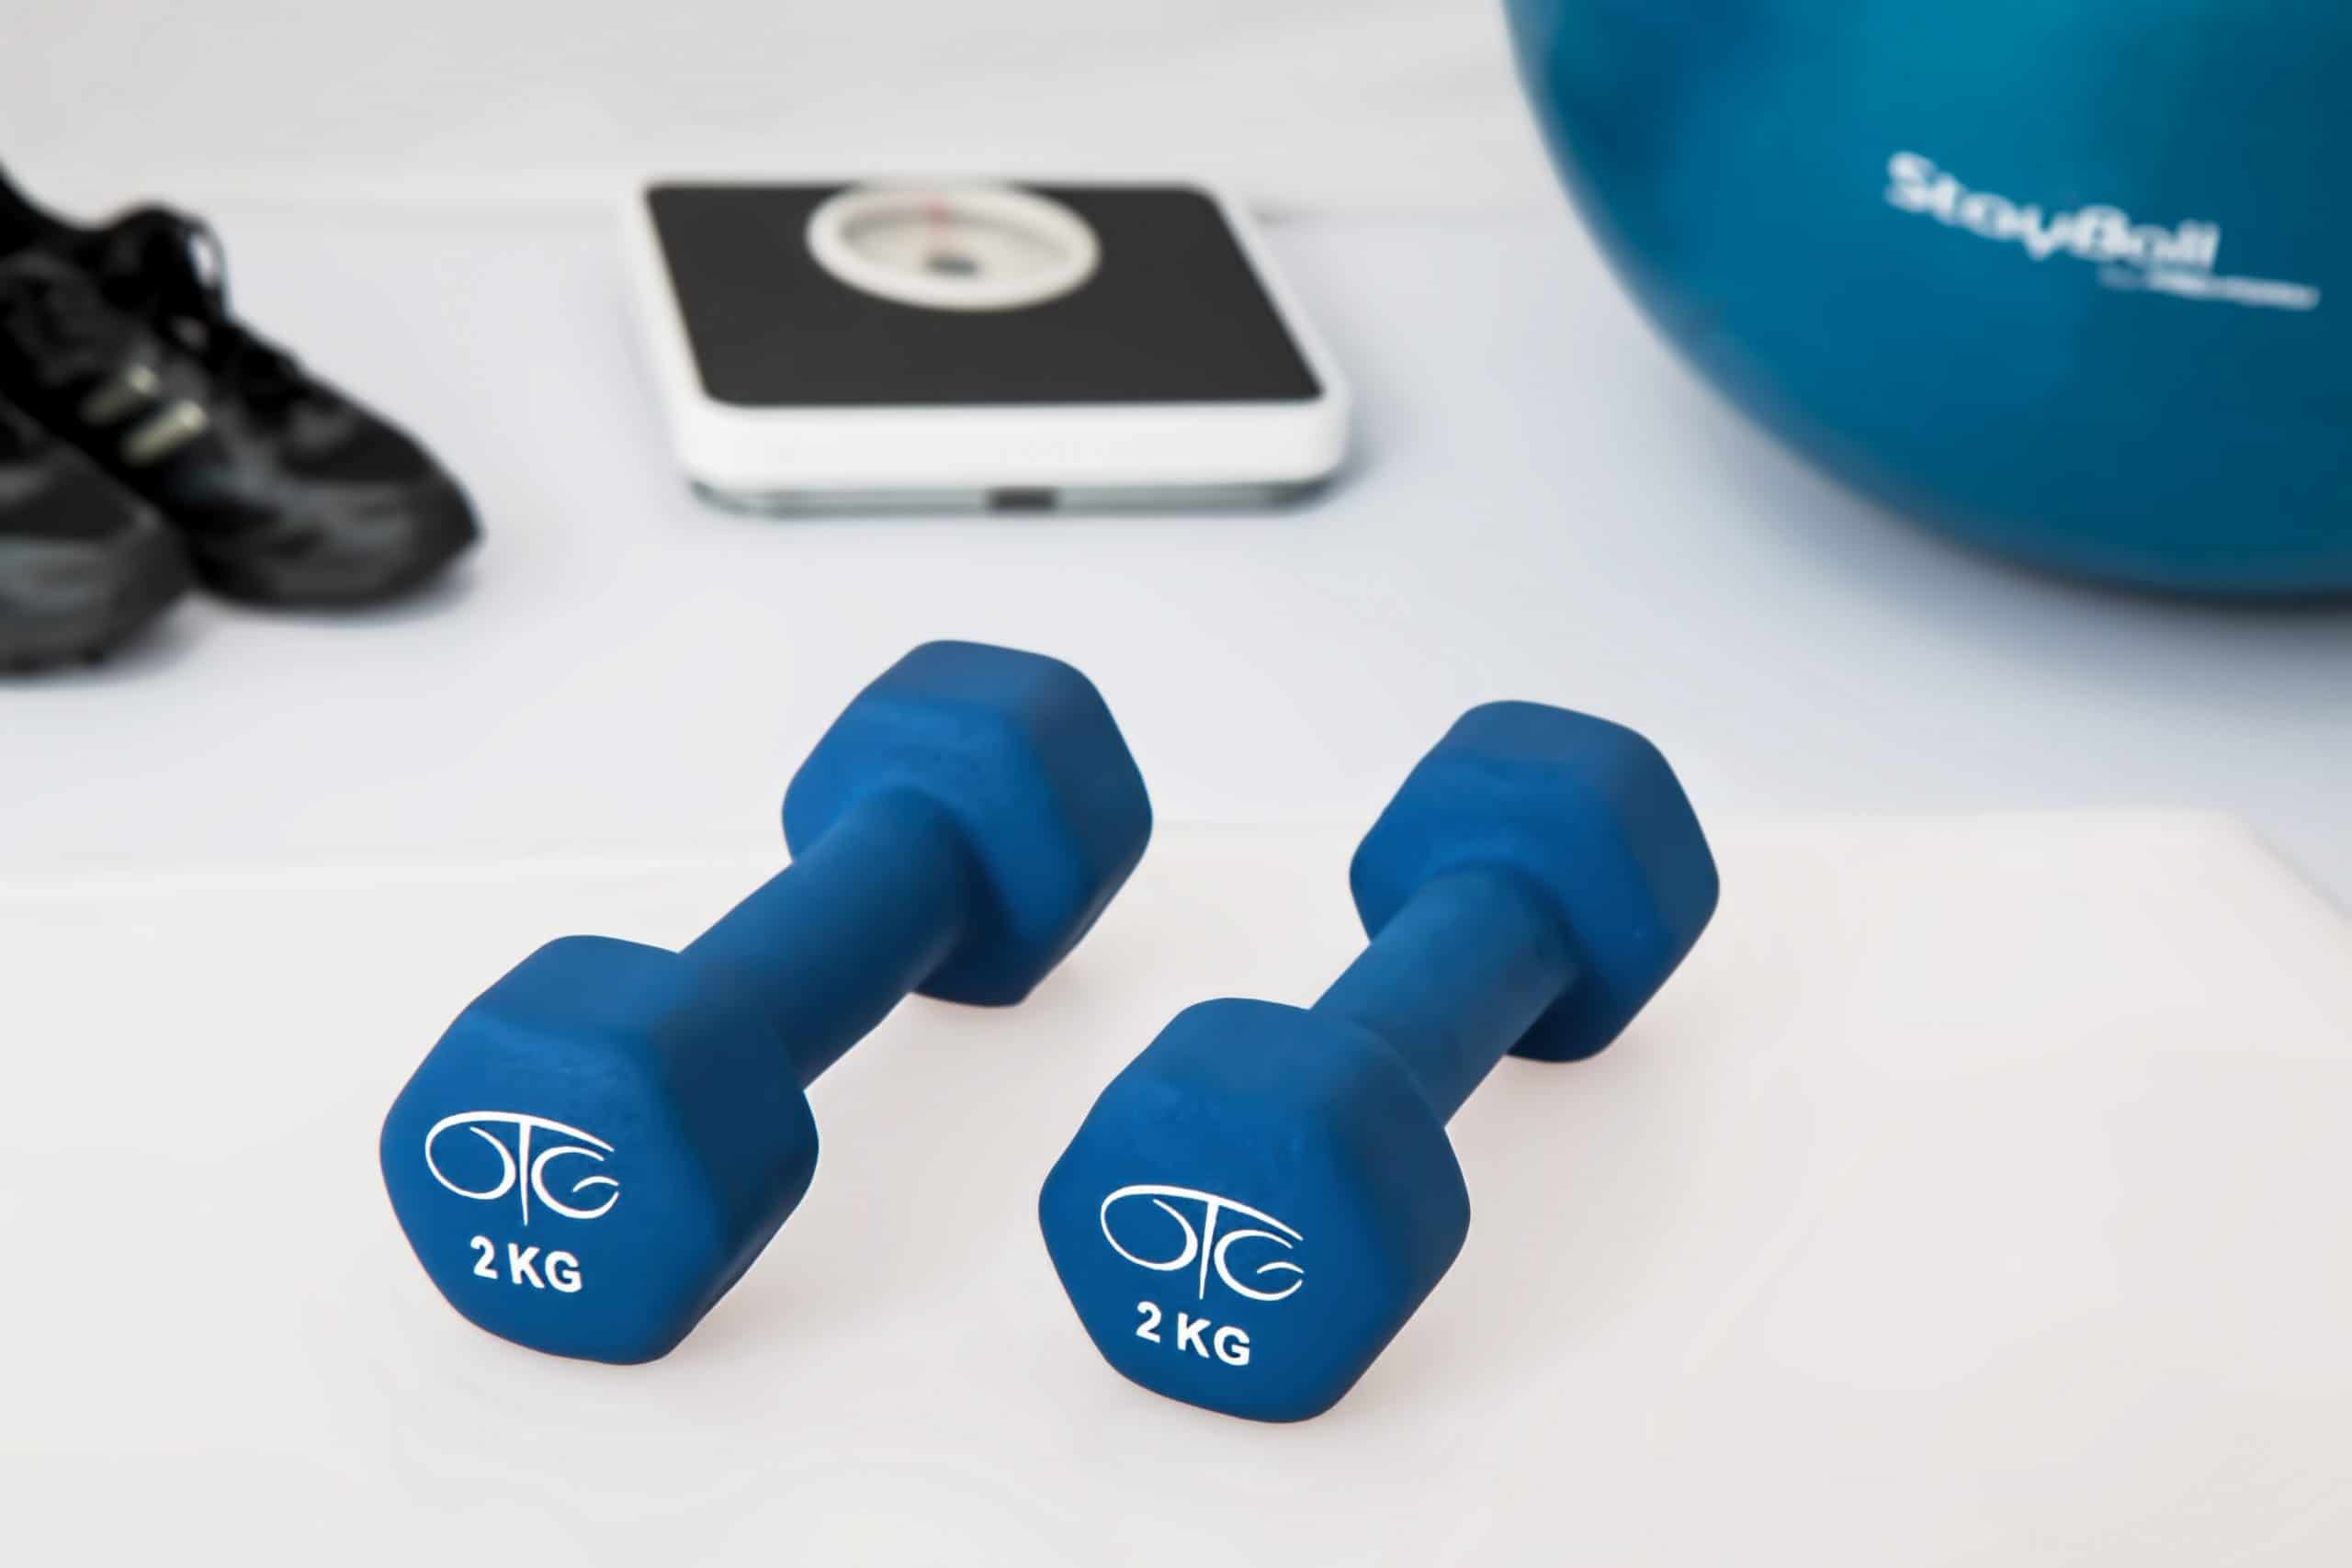 two 2kg blue dumbbells next to various exercise equipment for seniors to stretch